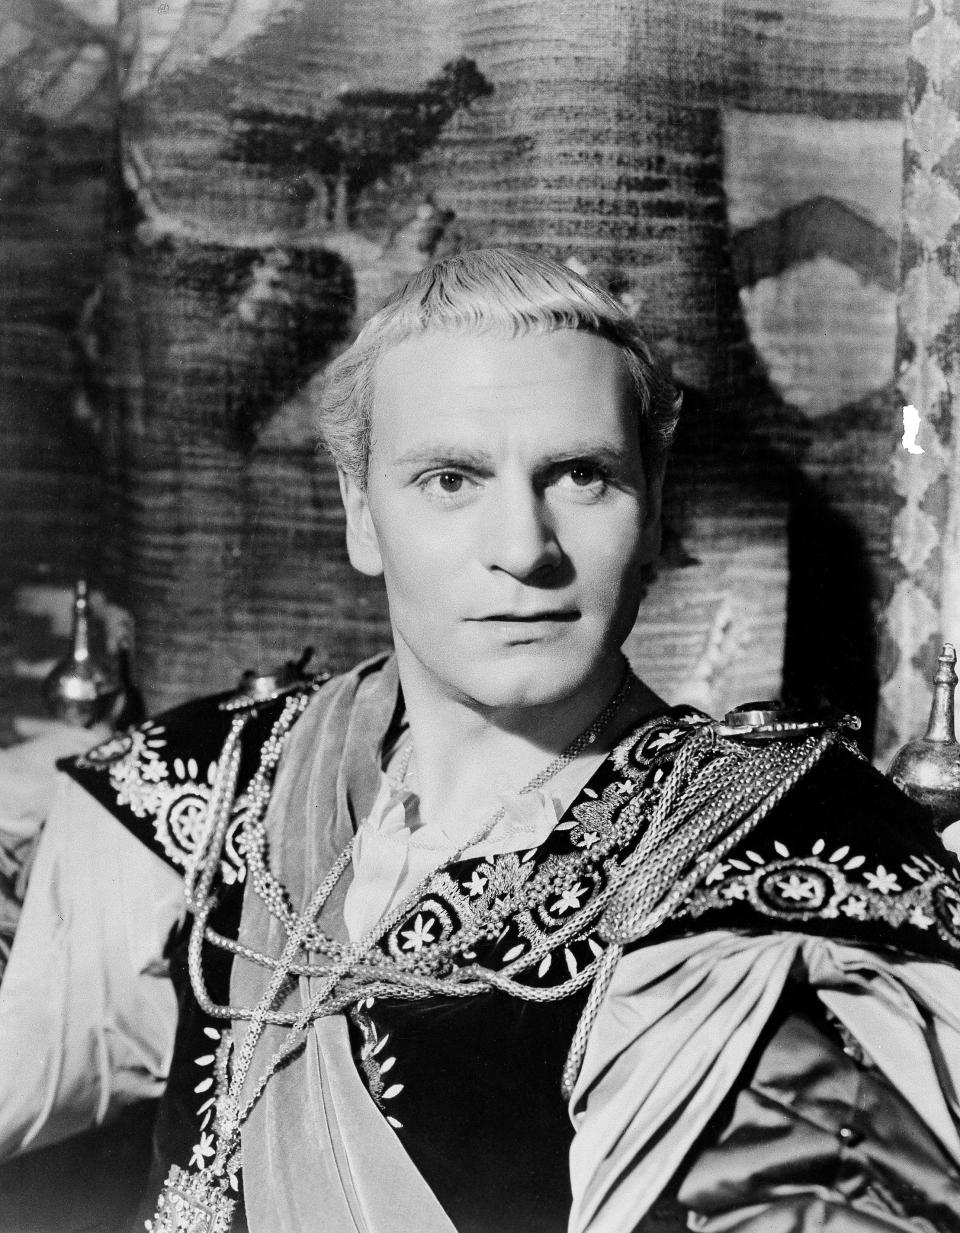 Laurence Olivier is seen in the title role of Shakespeare's "Hamlet" in his 1948 film version.